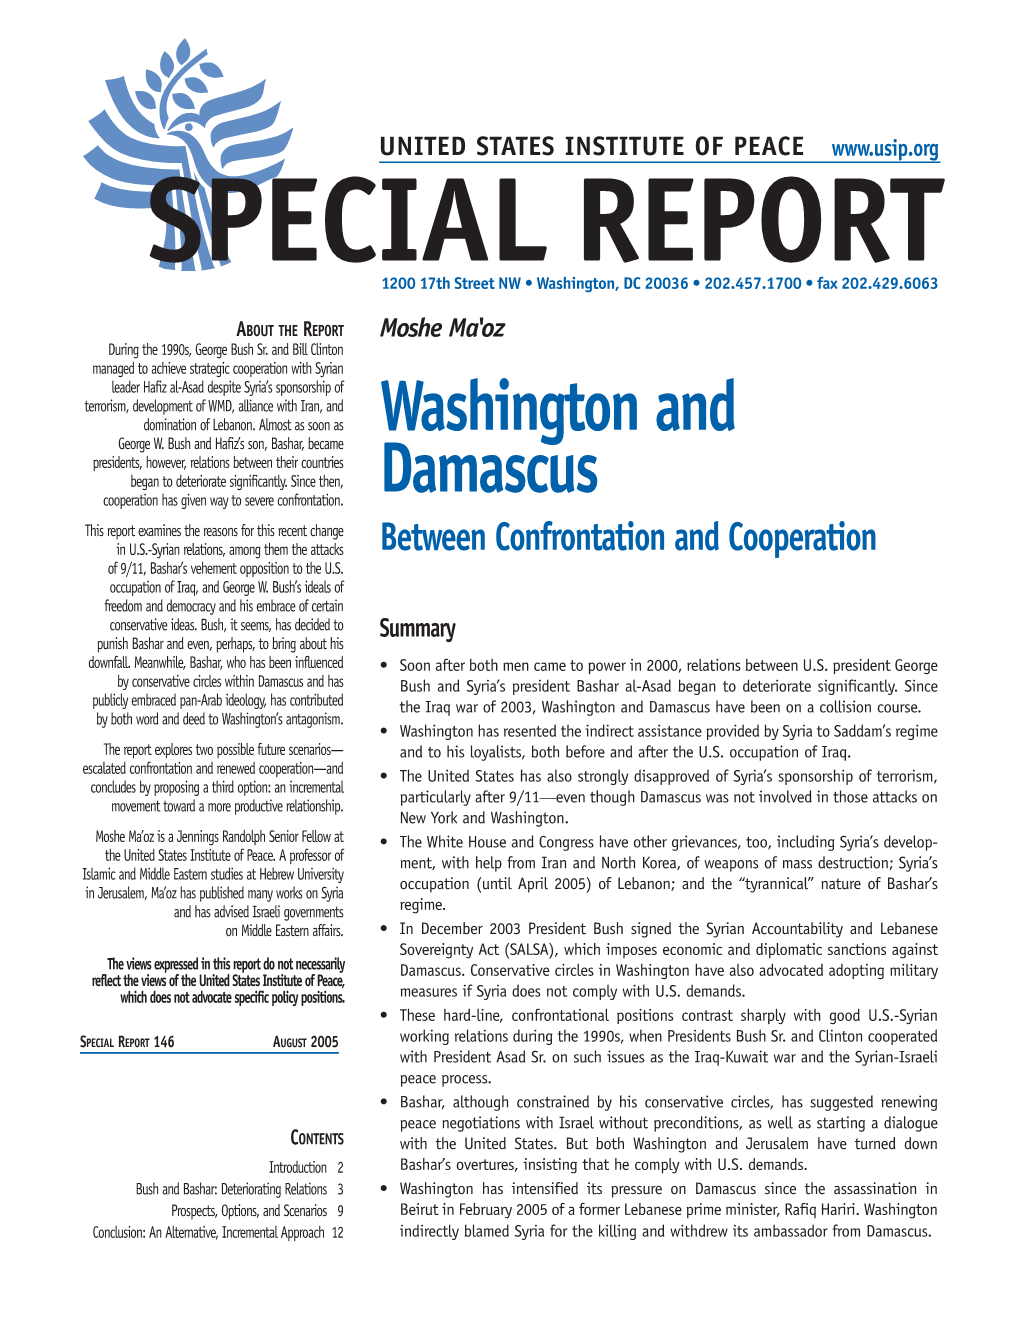 Washington and Damascus: Between Confrontation and Cooperation